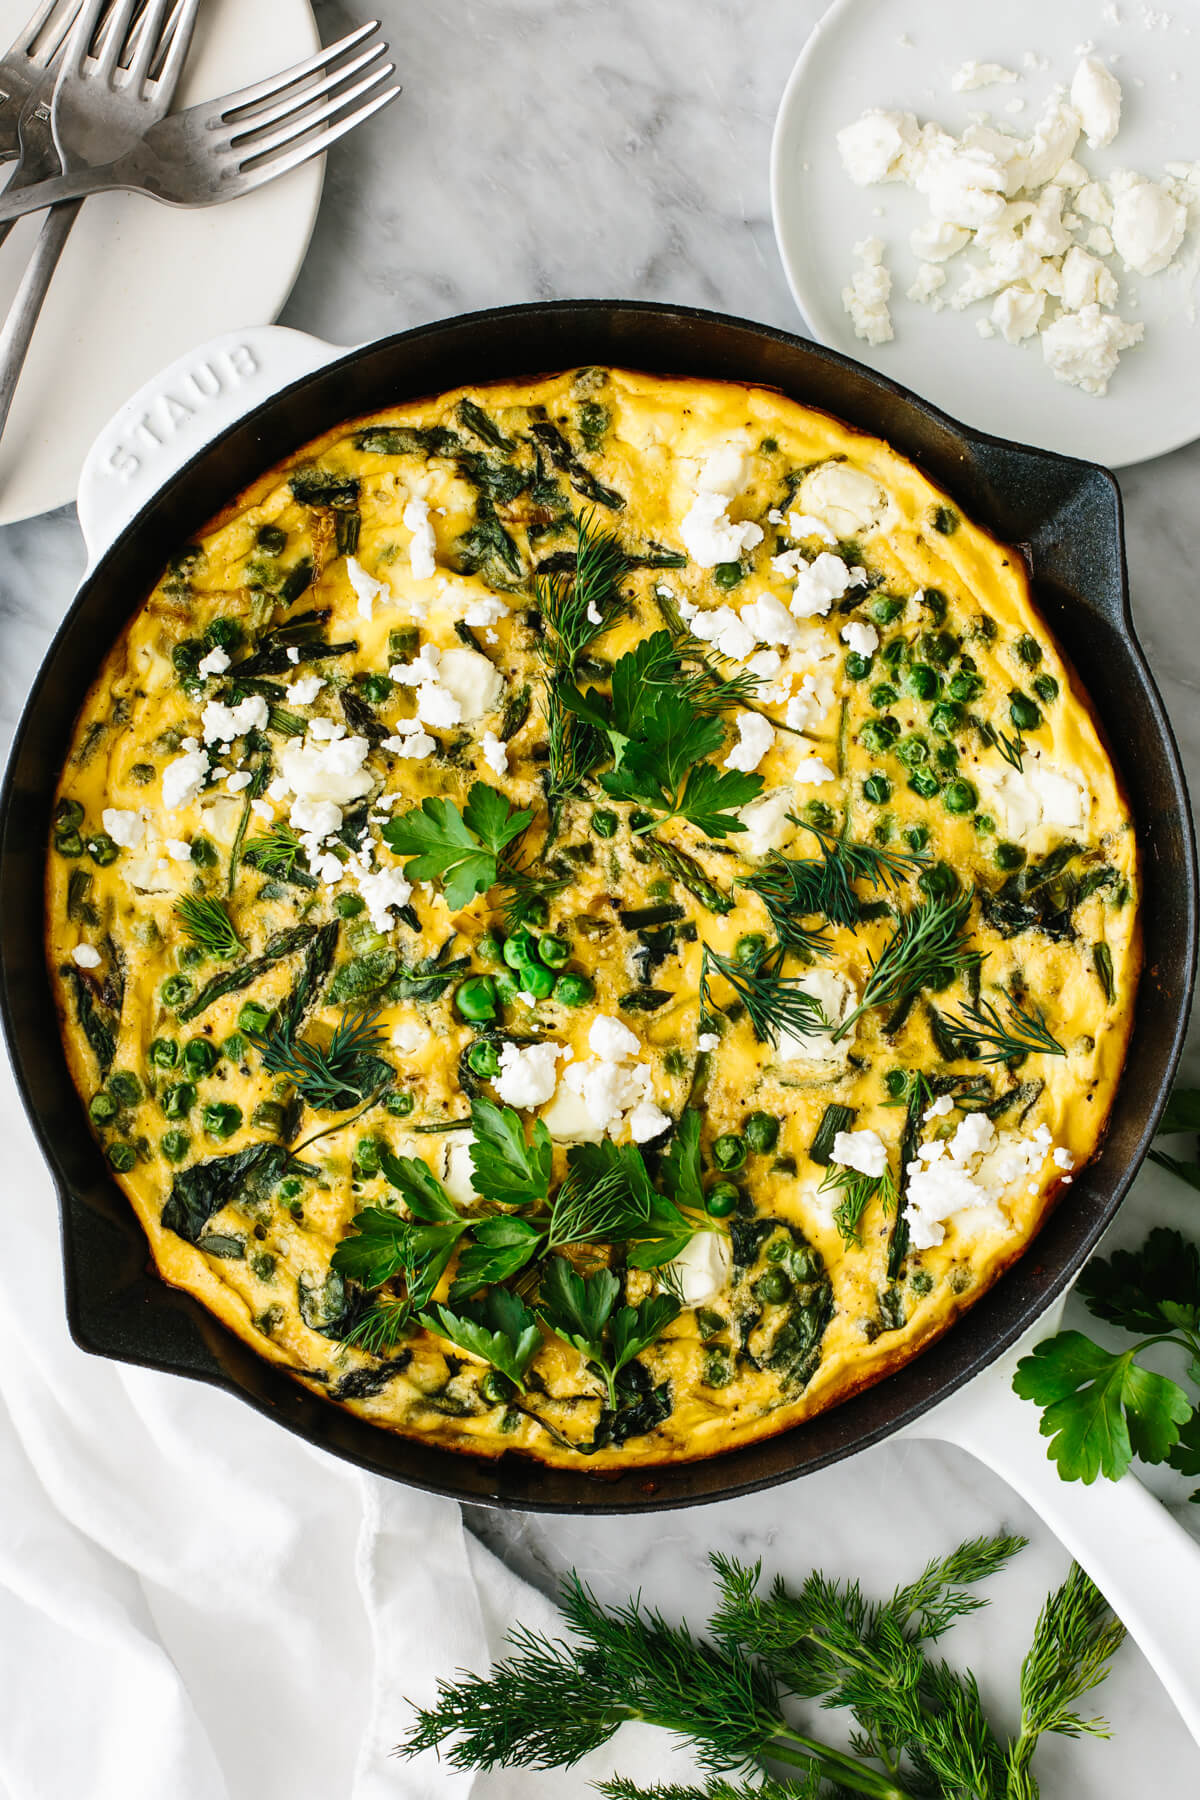 Spring vegetable frittata in a skillet on a table.